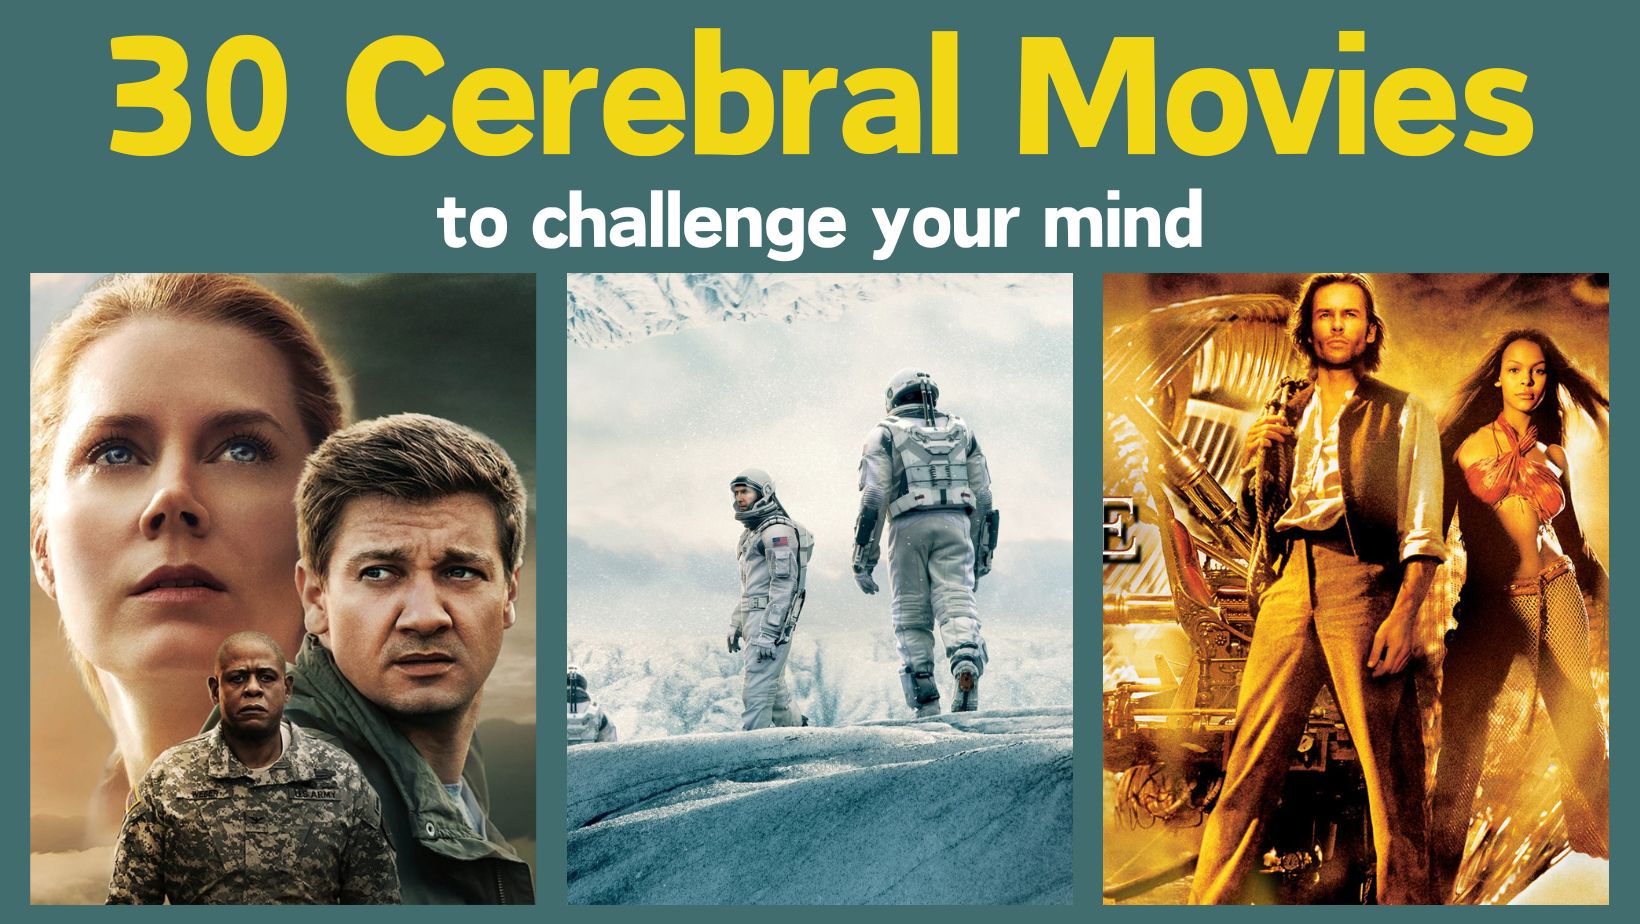 30 Most Highly Conceptual Cerebral Movies to Challenge Your Mind